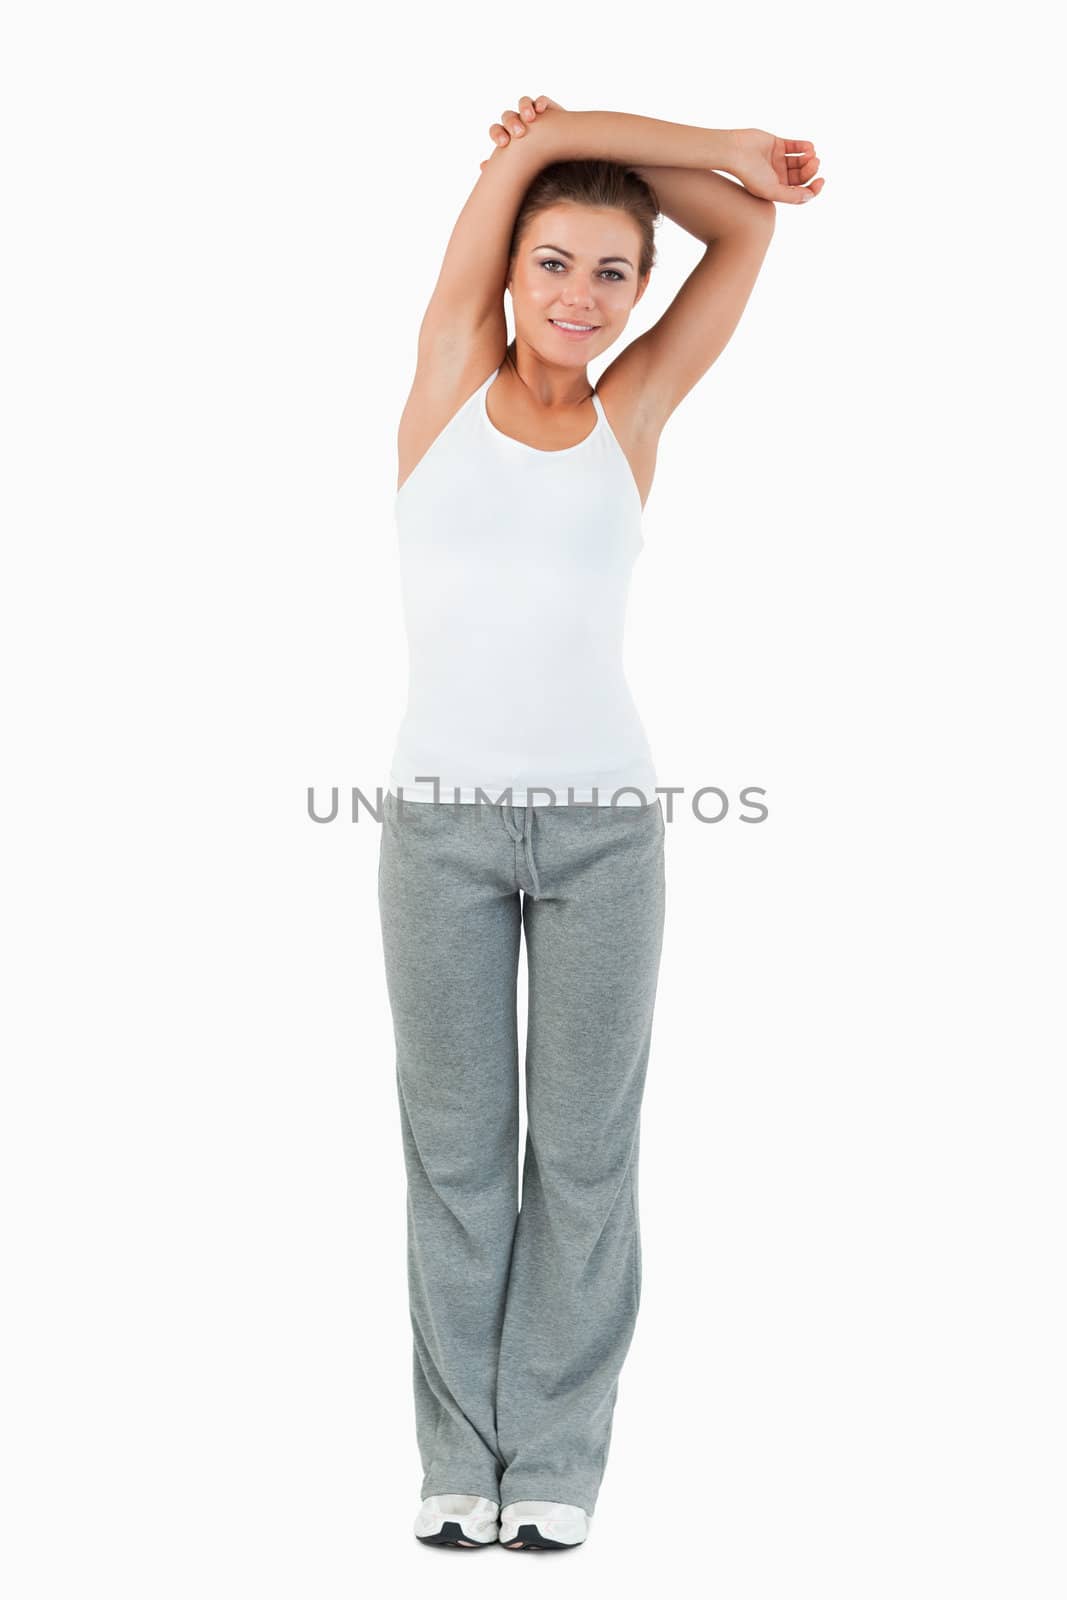 Portrait of a woman stretching her arms by Wavebreakmedia